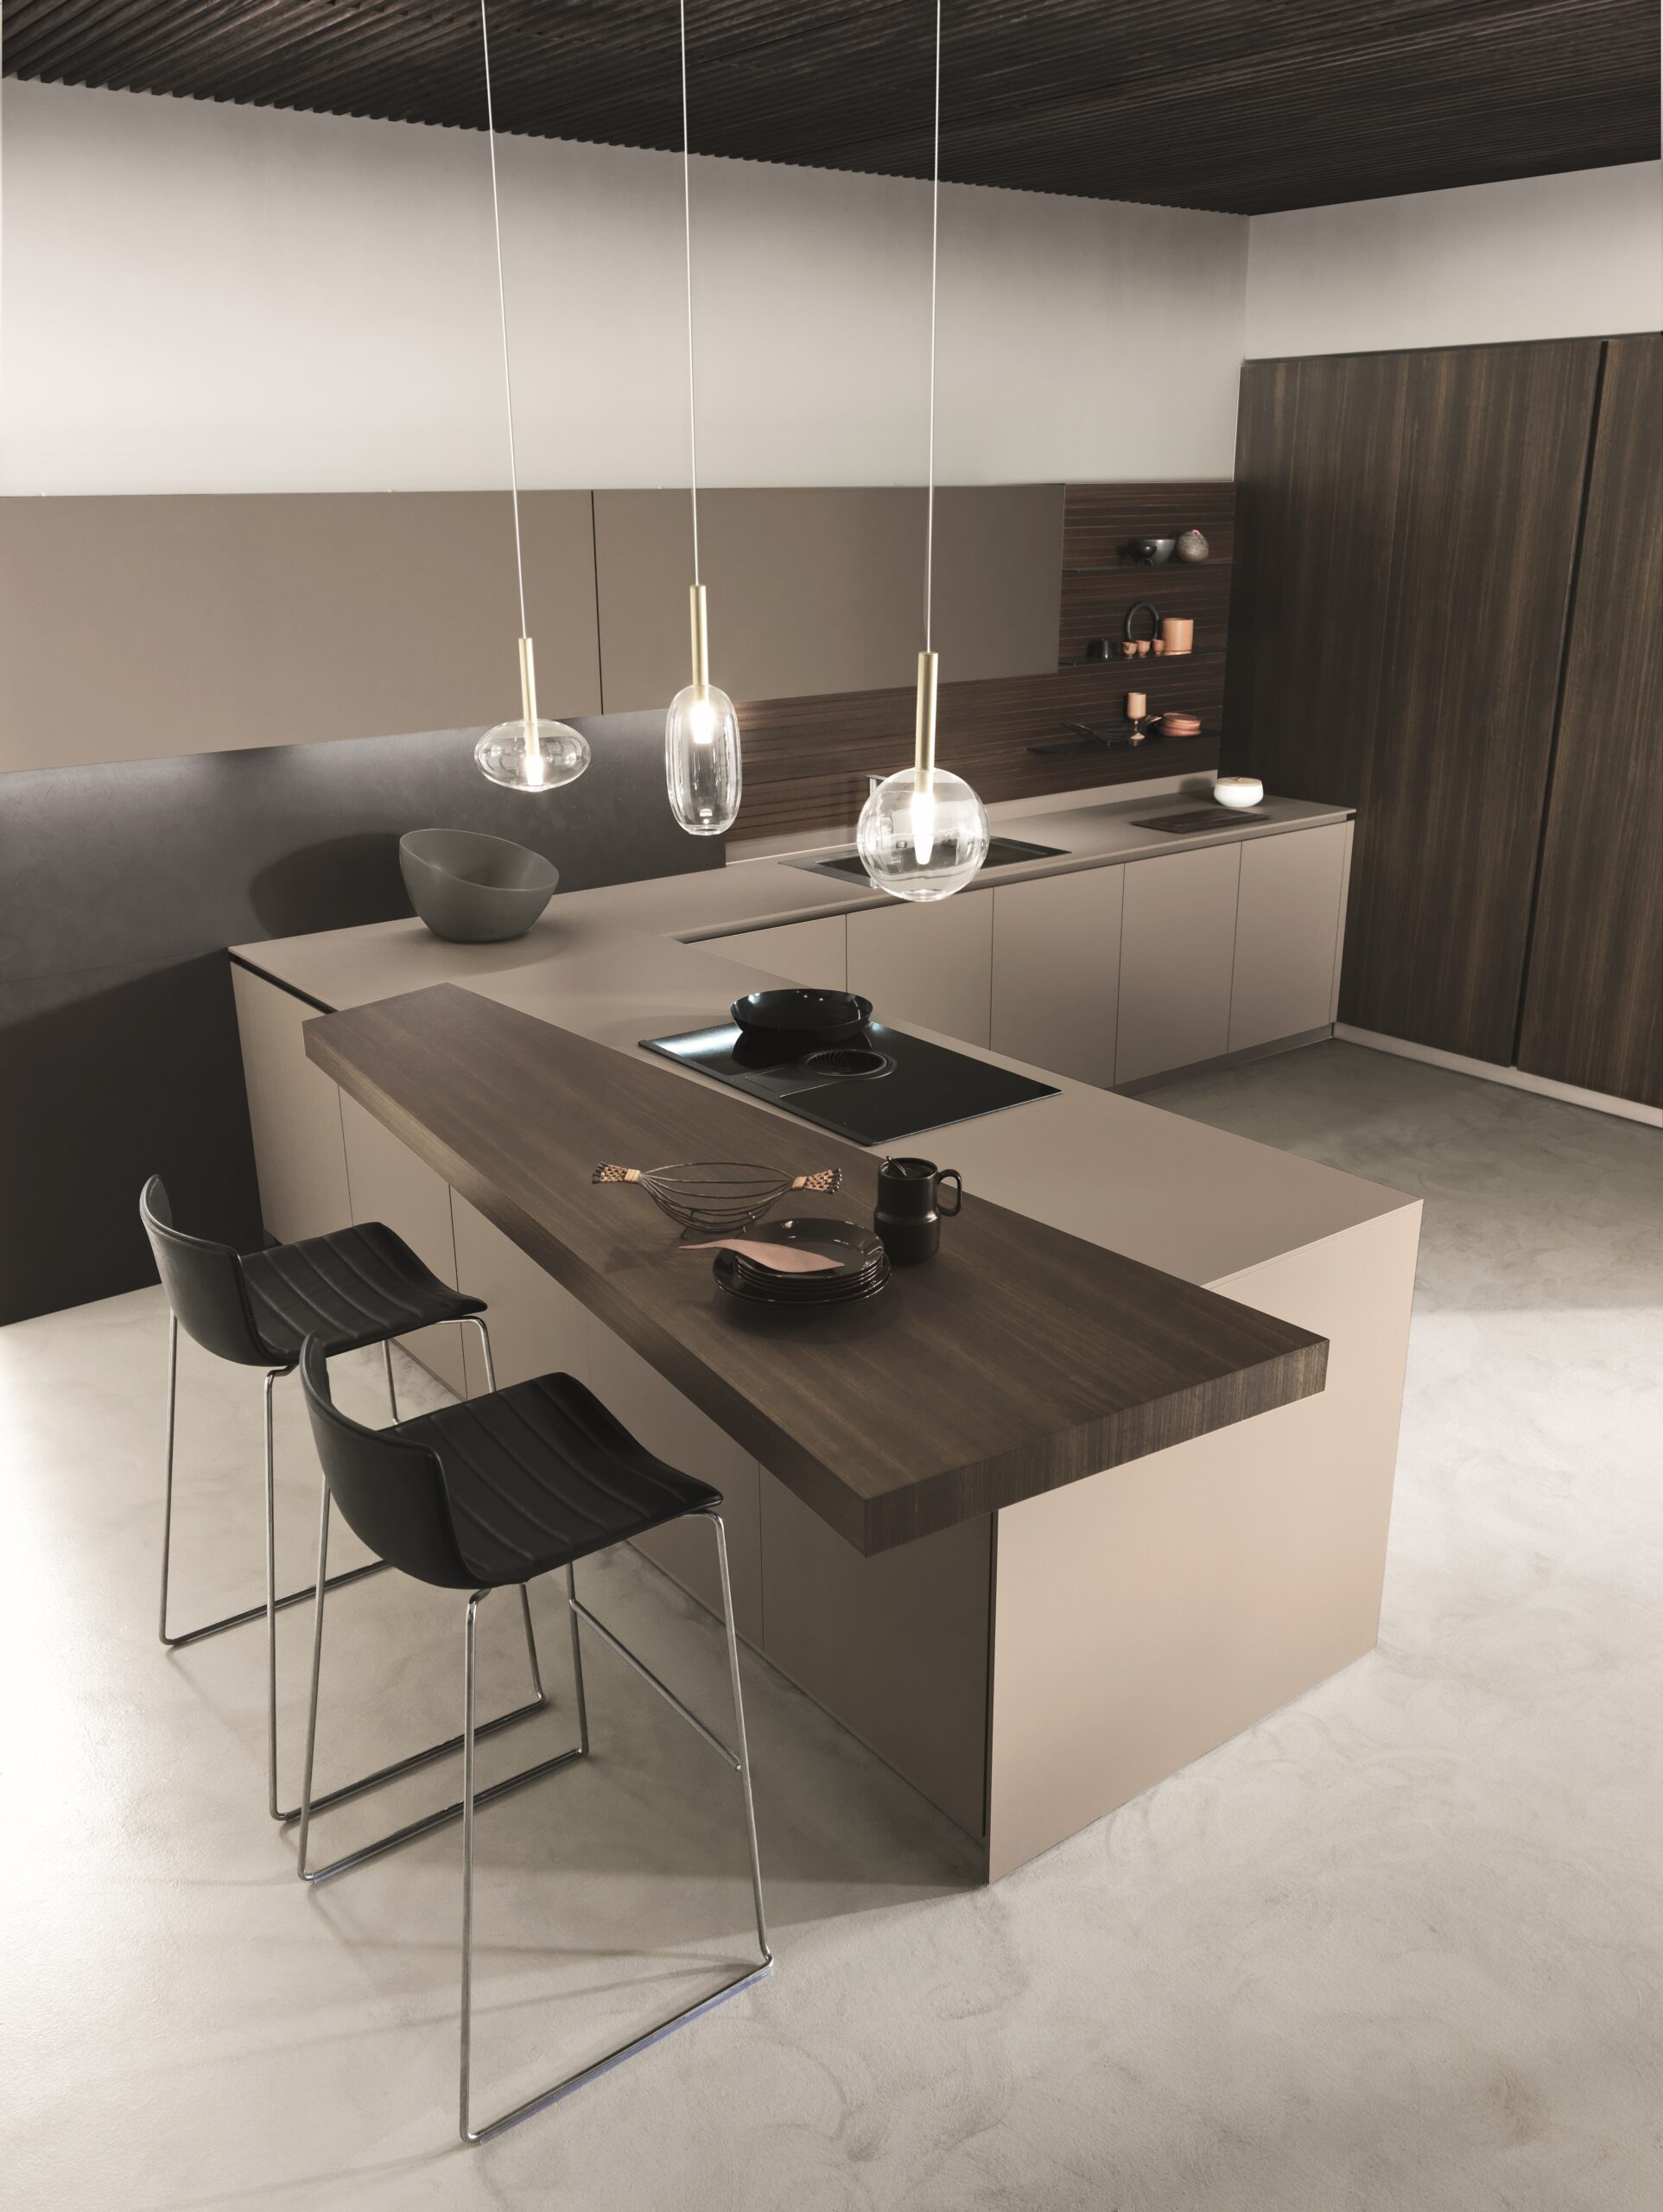 Spacious kitchen island as the central hub in a luxury kitchen